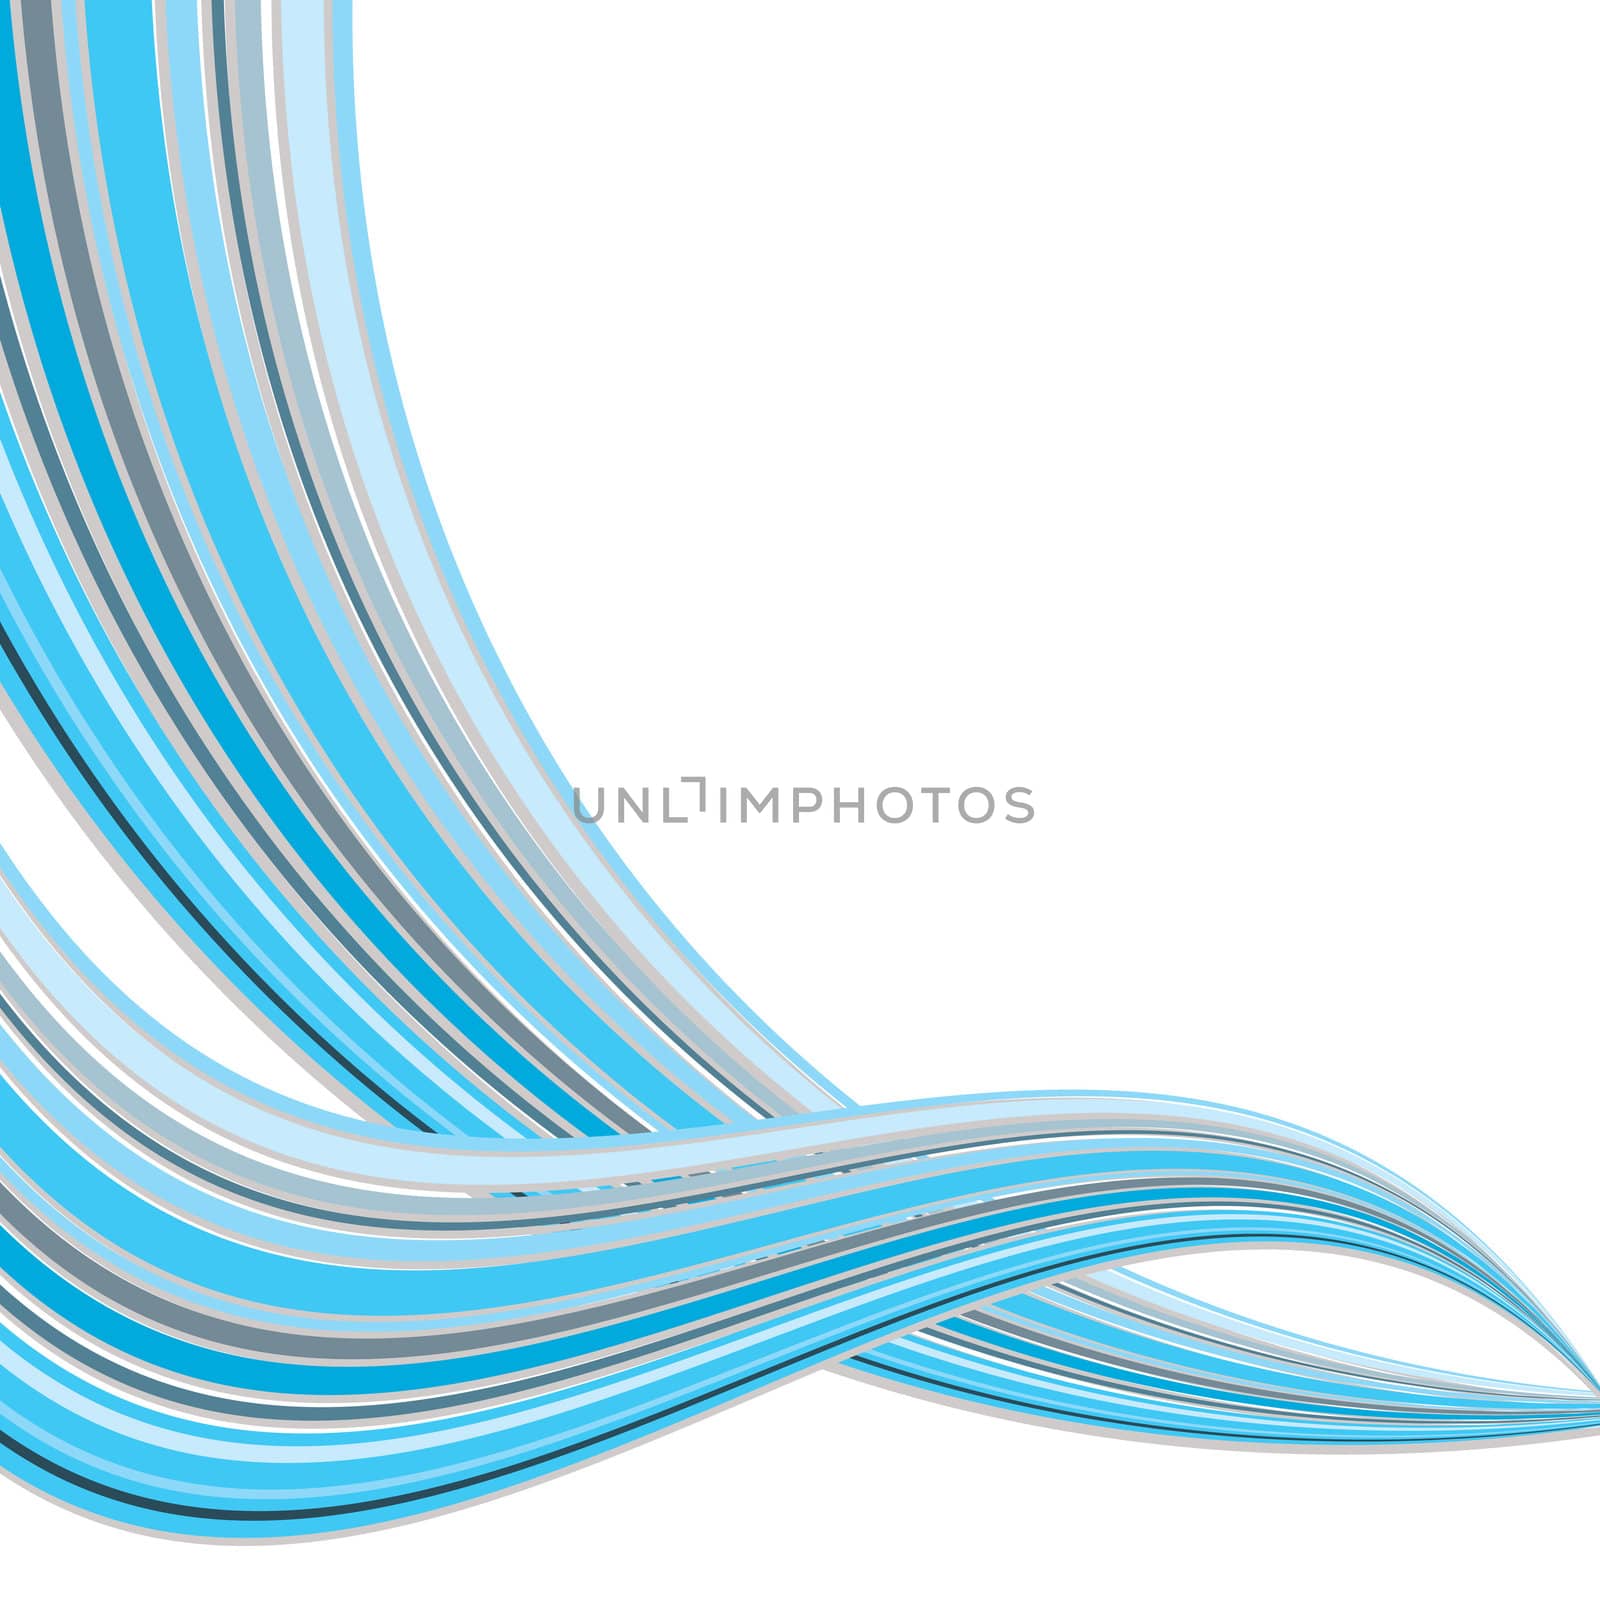 Flowing blue strip line background with copy space